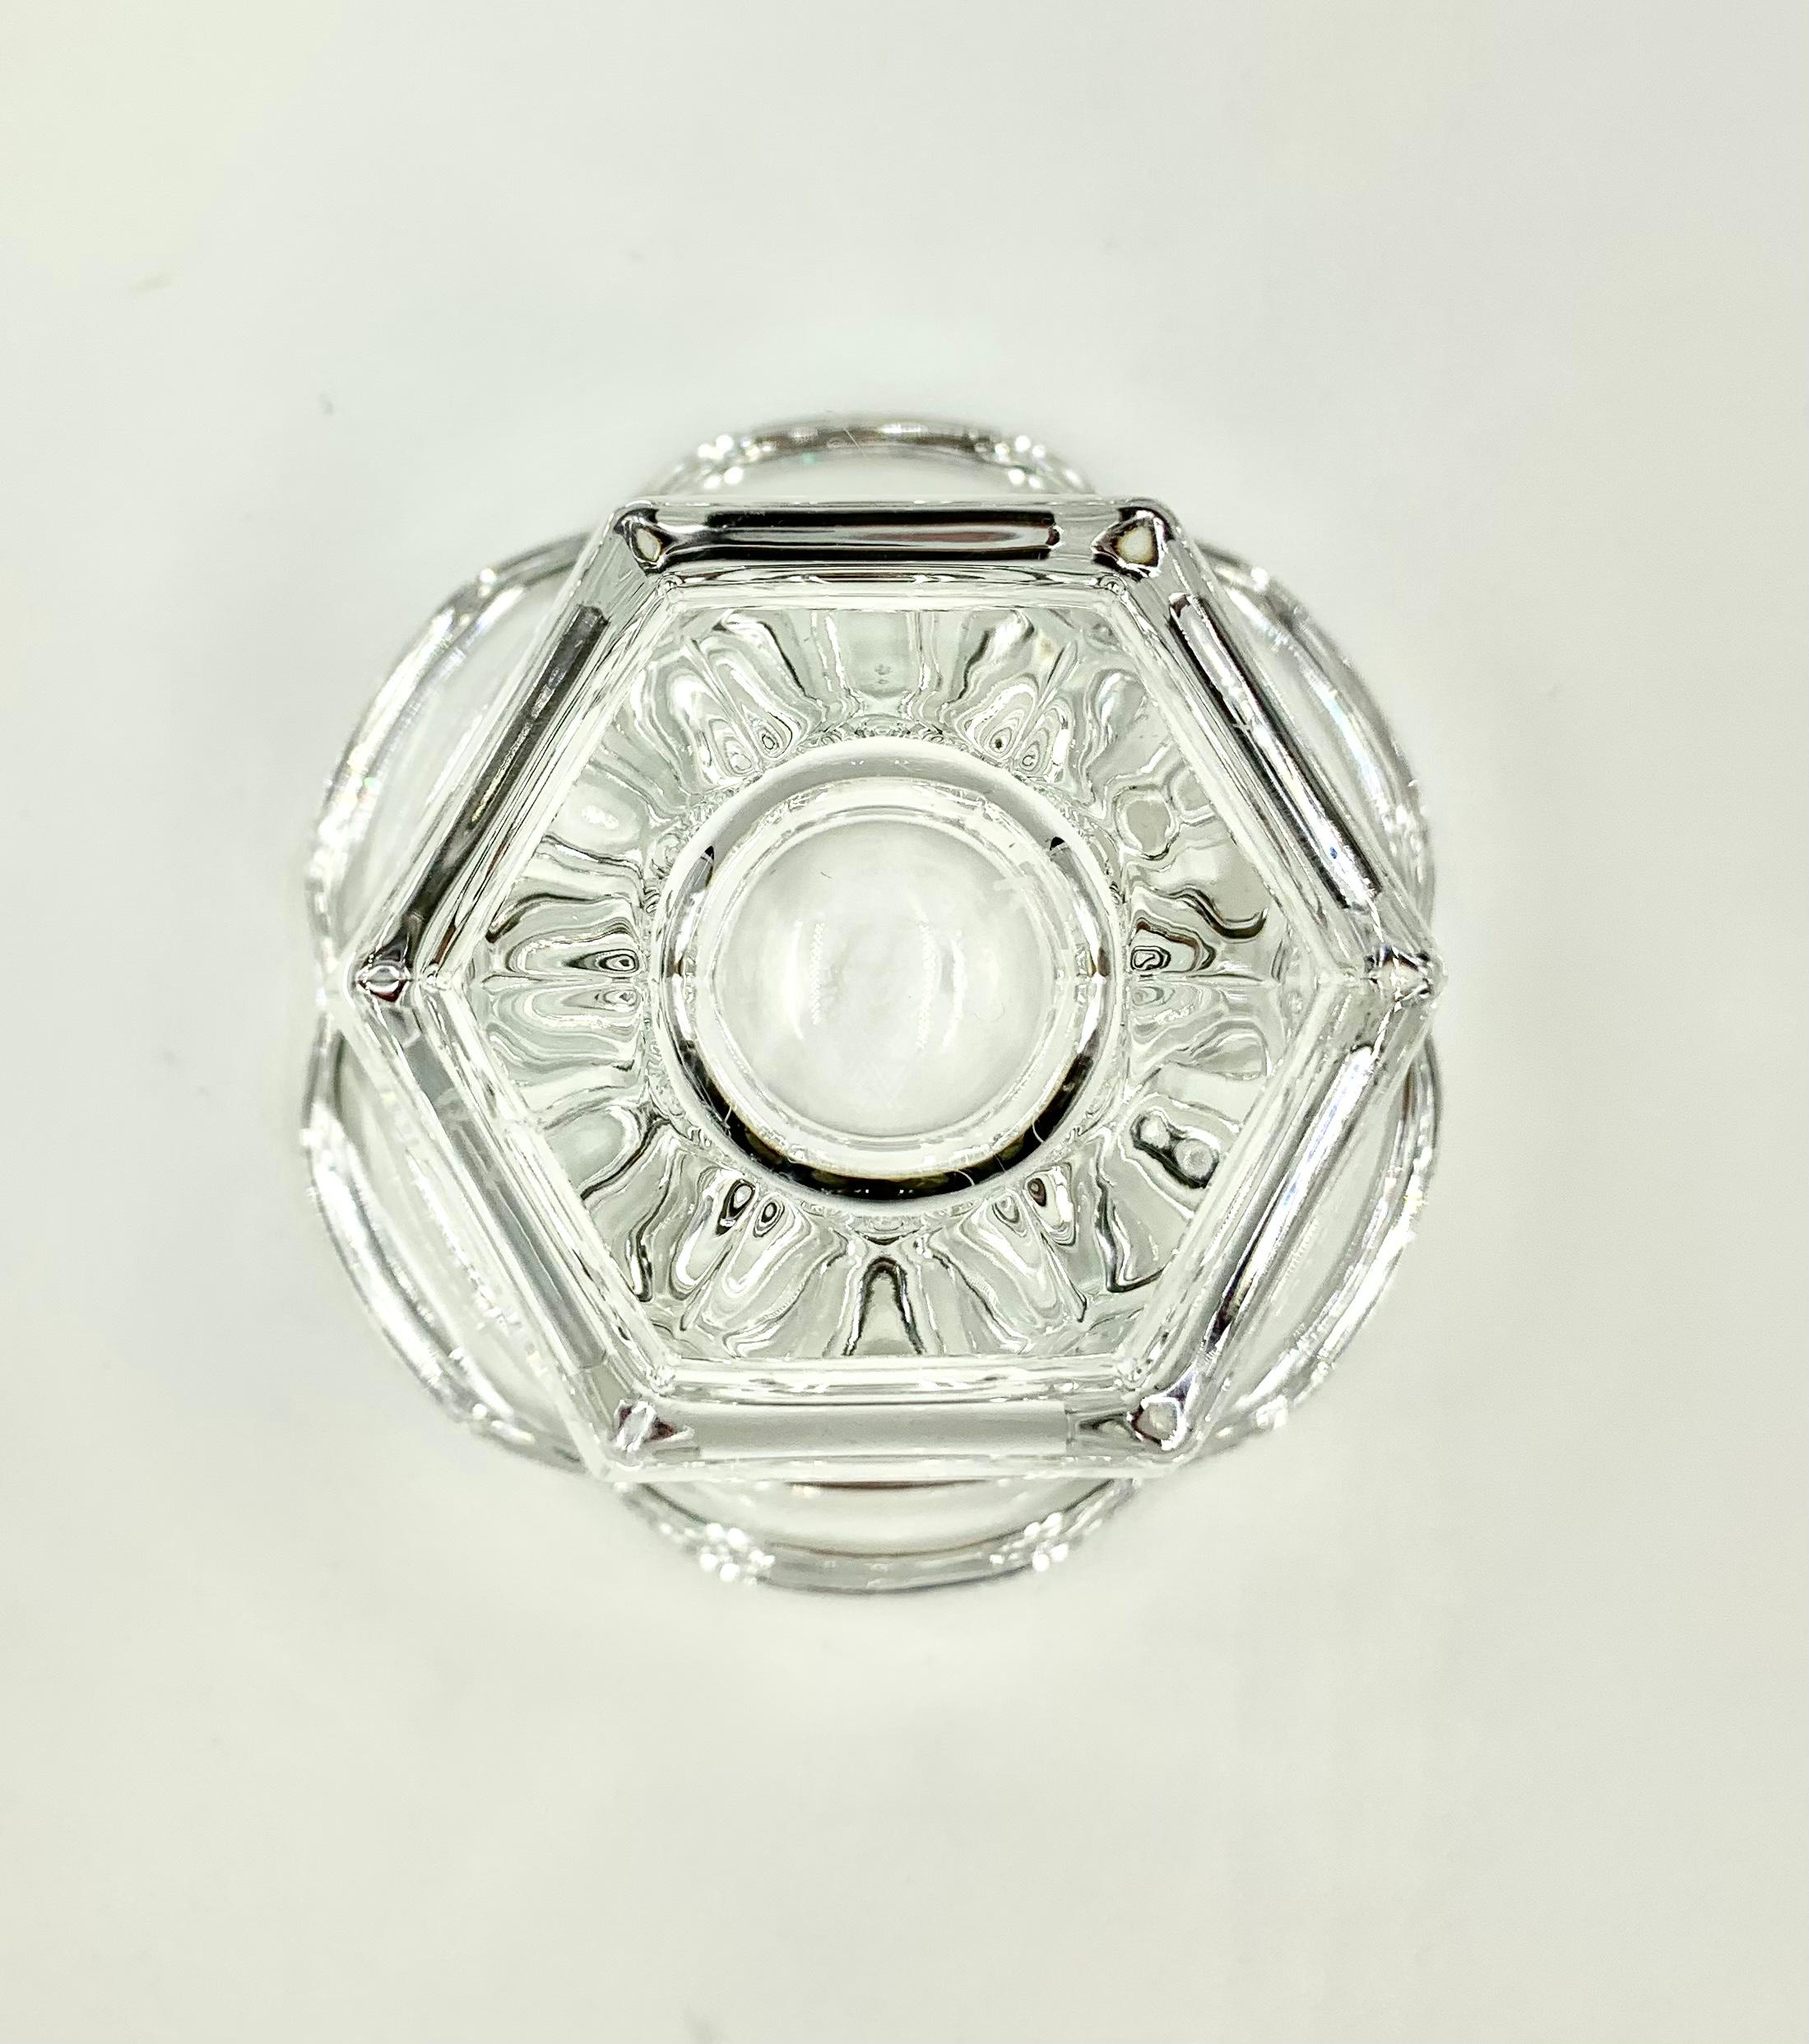 Fine Baccarat Crystal Harcourt Serving Piece In Excellent Condition For Sale In New York, NY